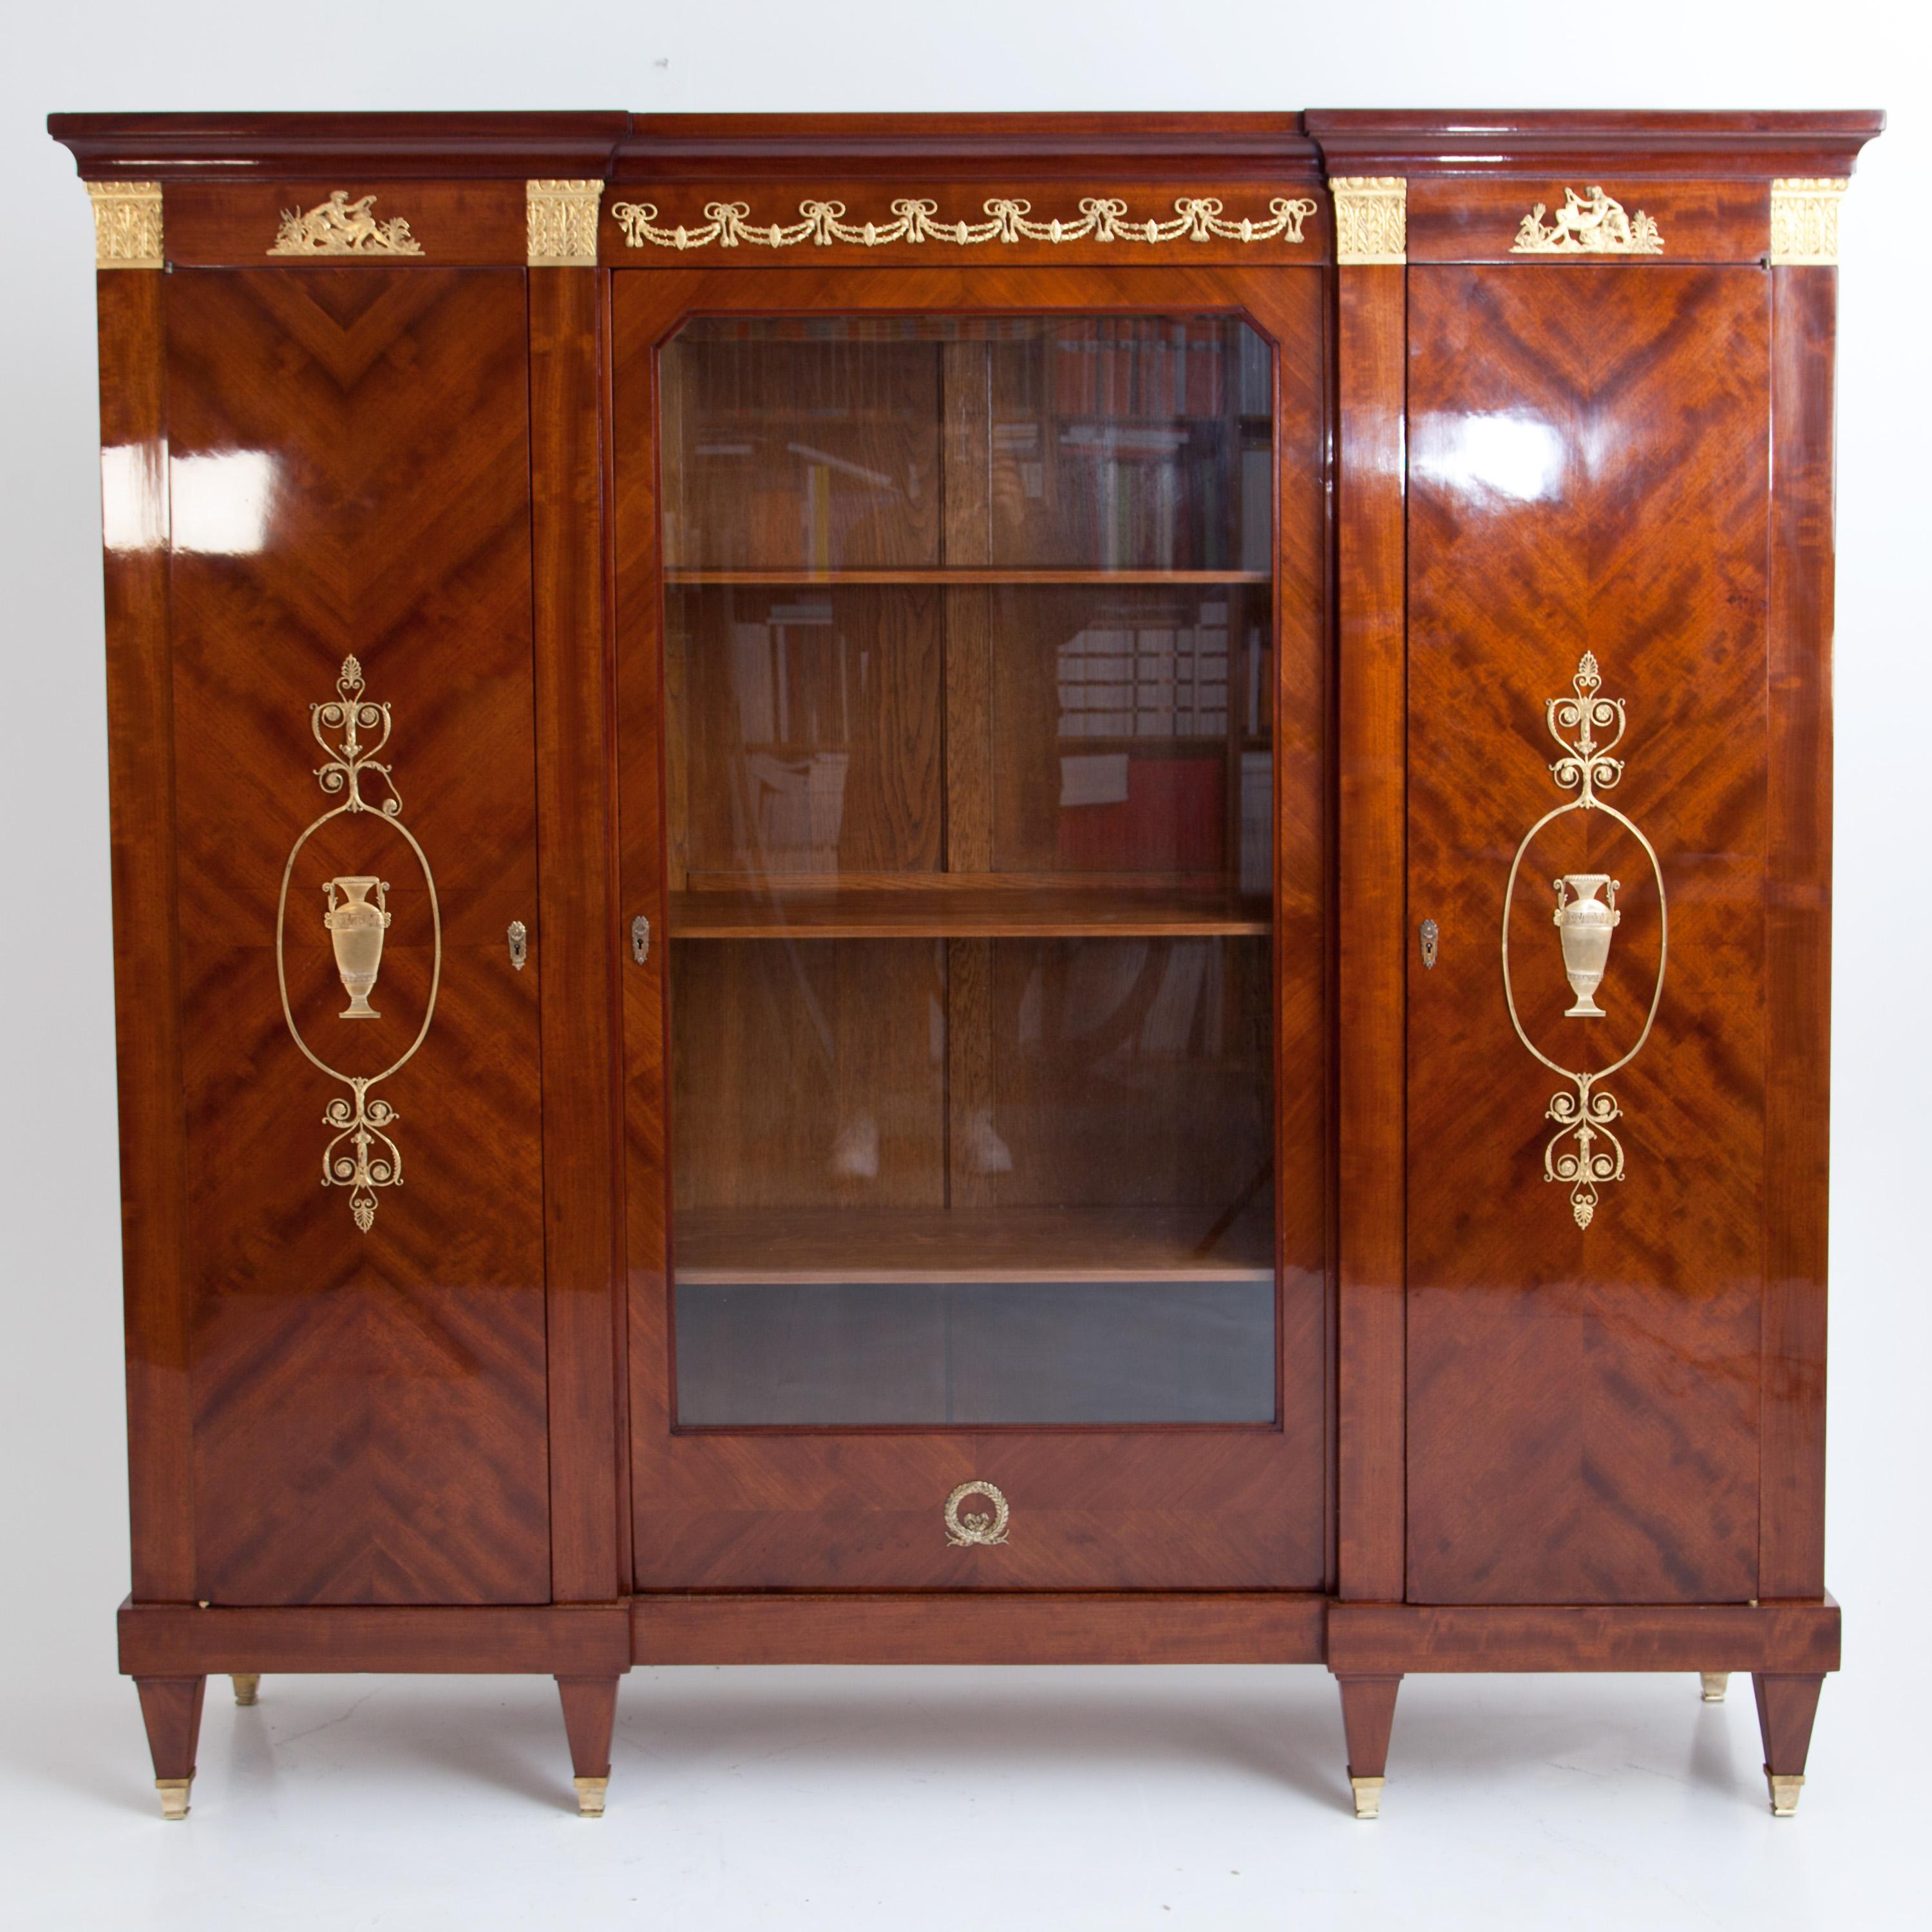 Large three-door bookcase in mahogany veneer standing on square pointed feet with brass sabots. The cupboard is decorated with large gilded appliqués in the Empire style in the form of urns, arabesques and festoons, and above the side doors are